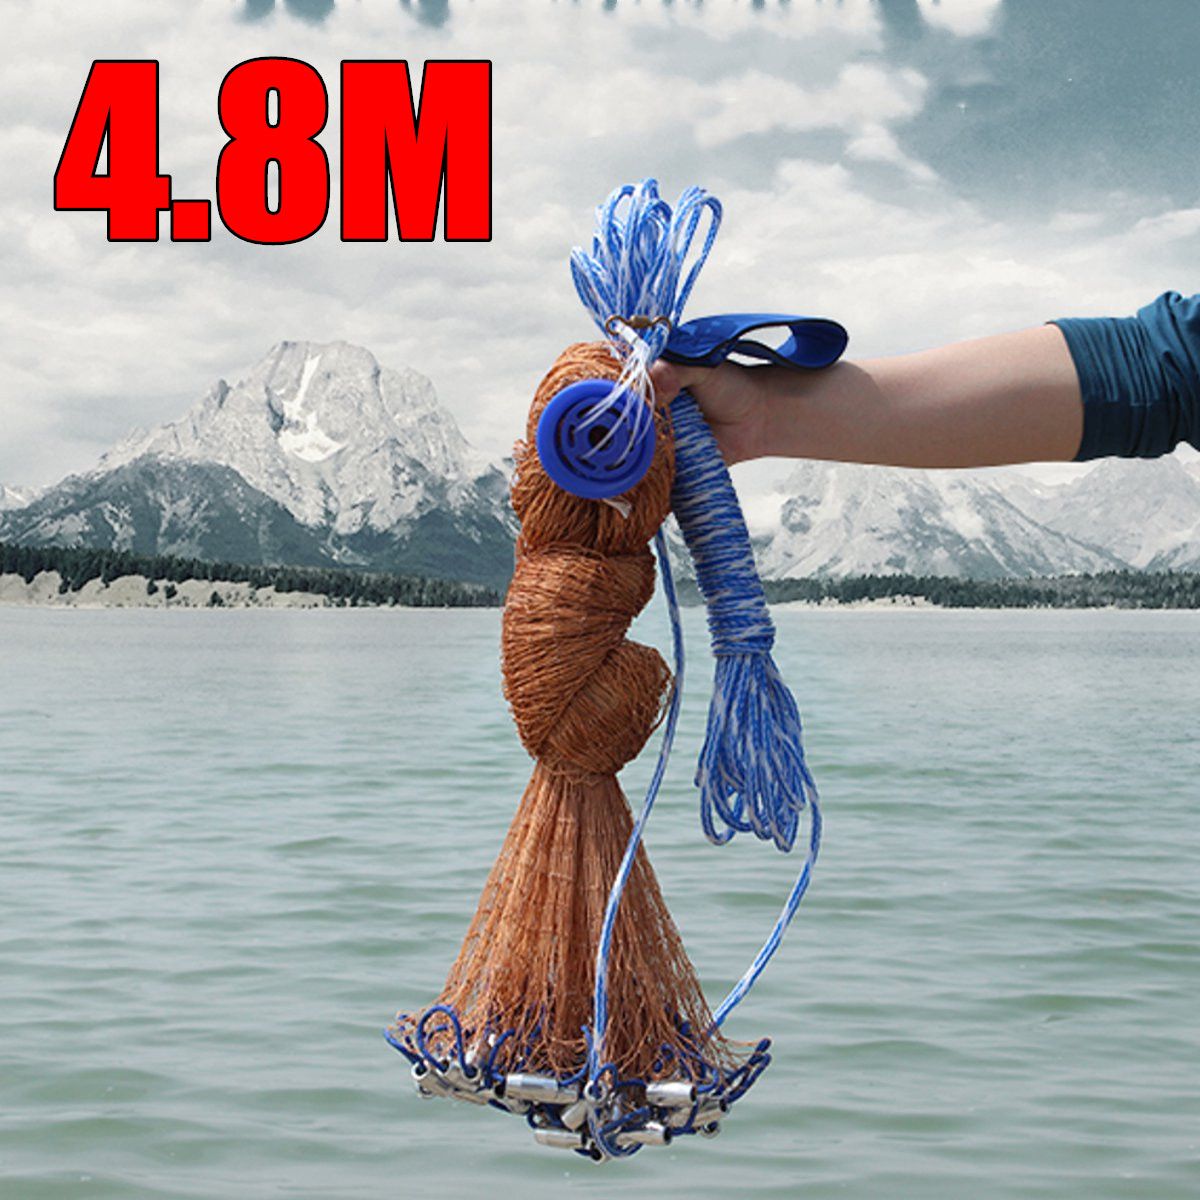 48M-Cast-Fishing-Net-Saltwater-Bait-Casting-Strong-Nylon-Line-With-Sinker-8FT-Brown-1269480